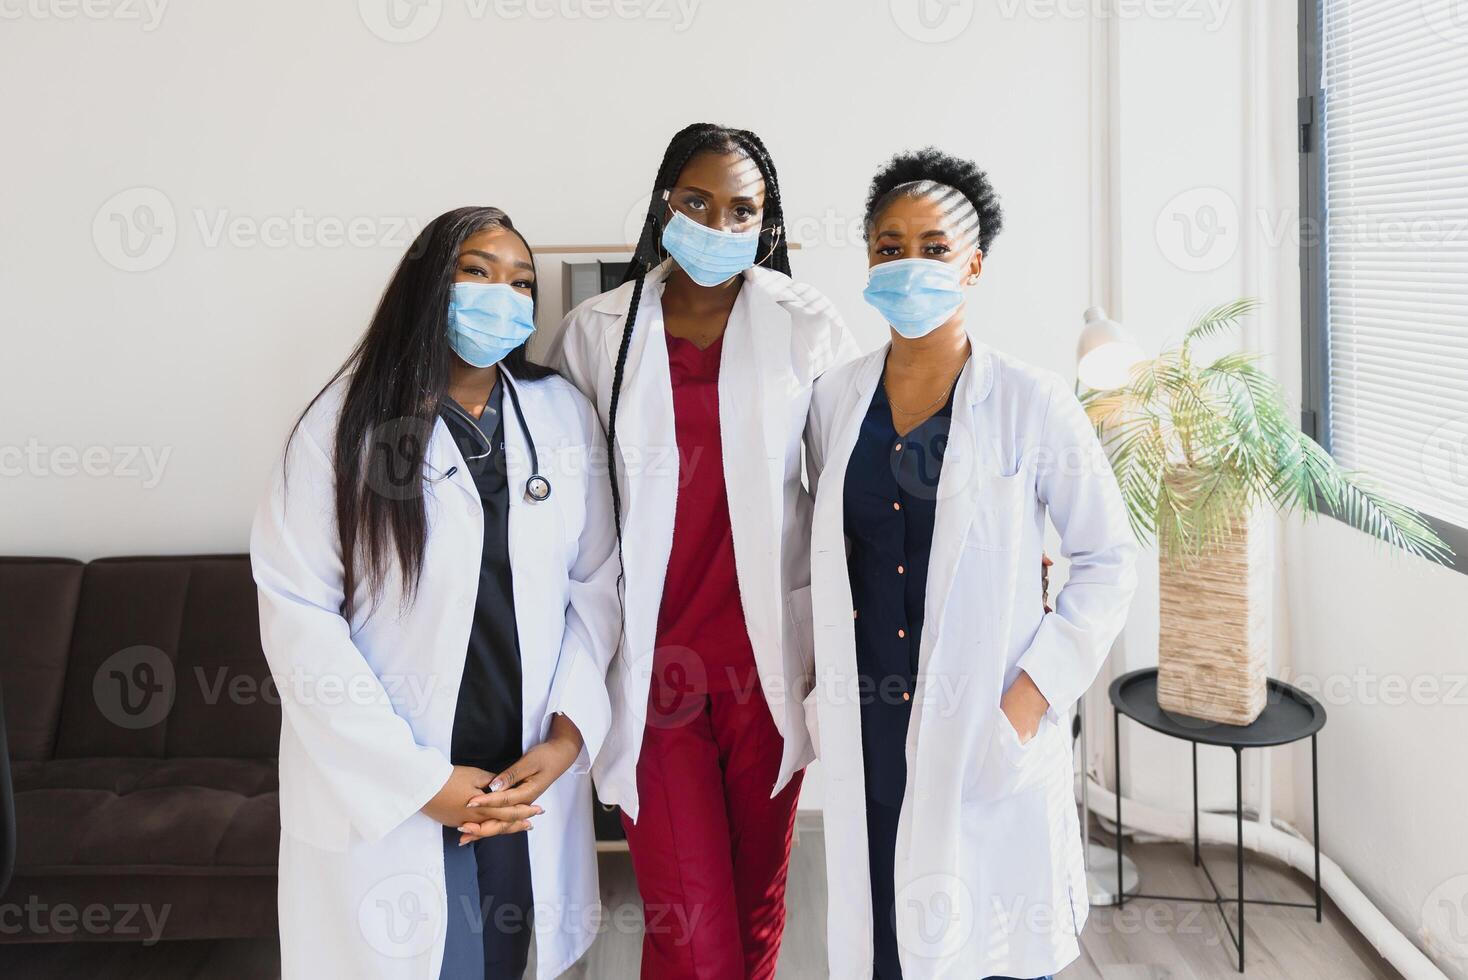 Group of healthcare workers wearing protective face masks while standing with arms crossed and looking at camera photo